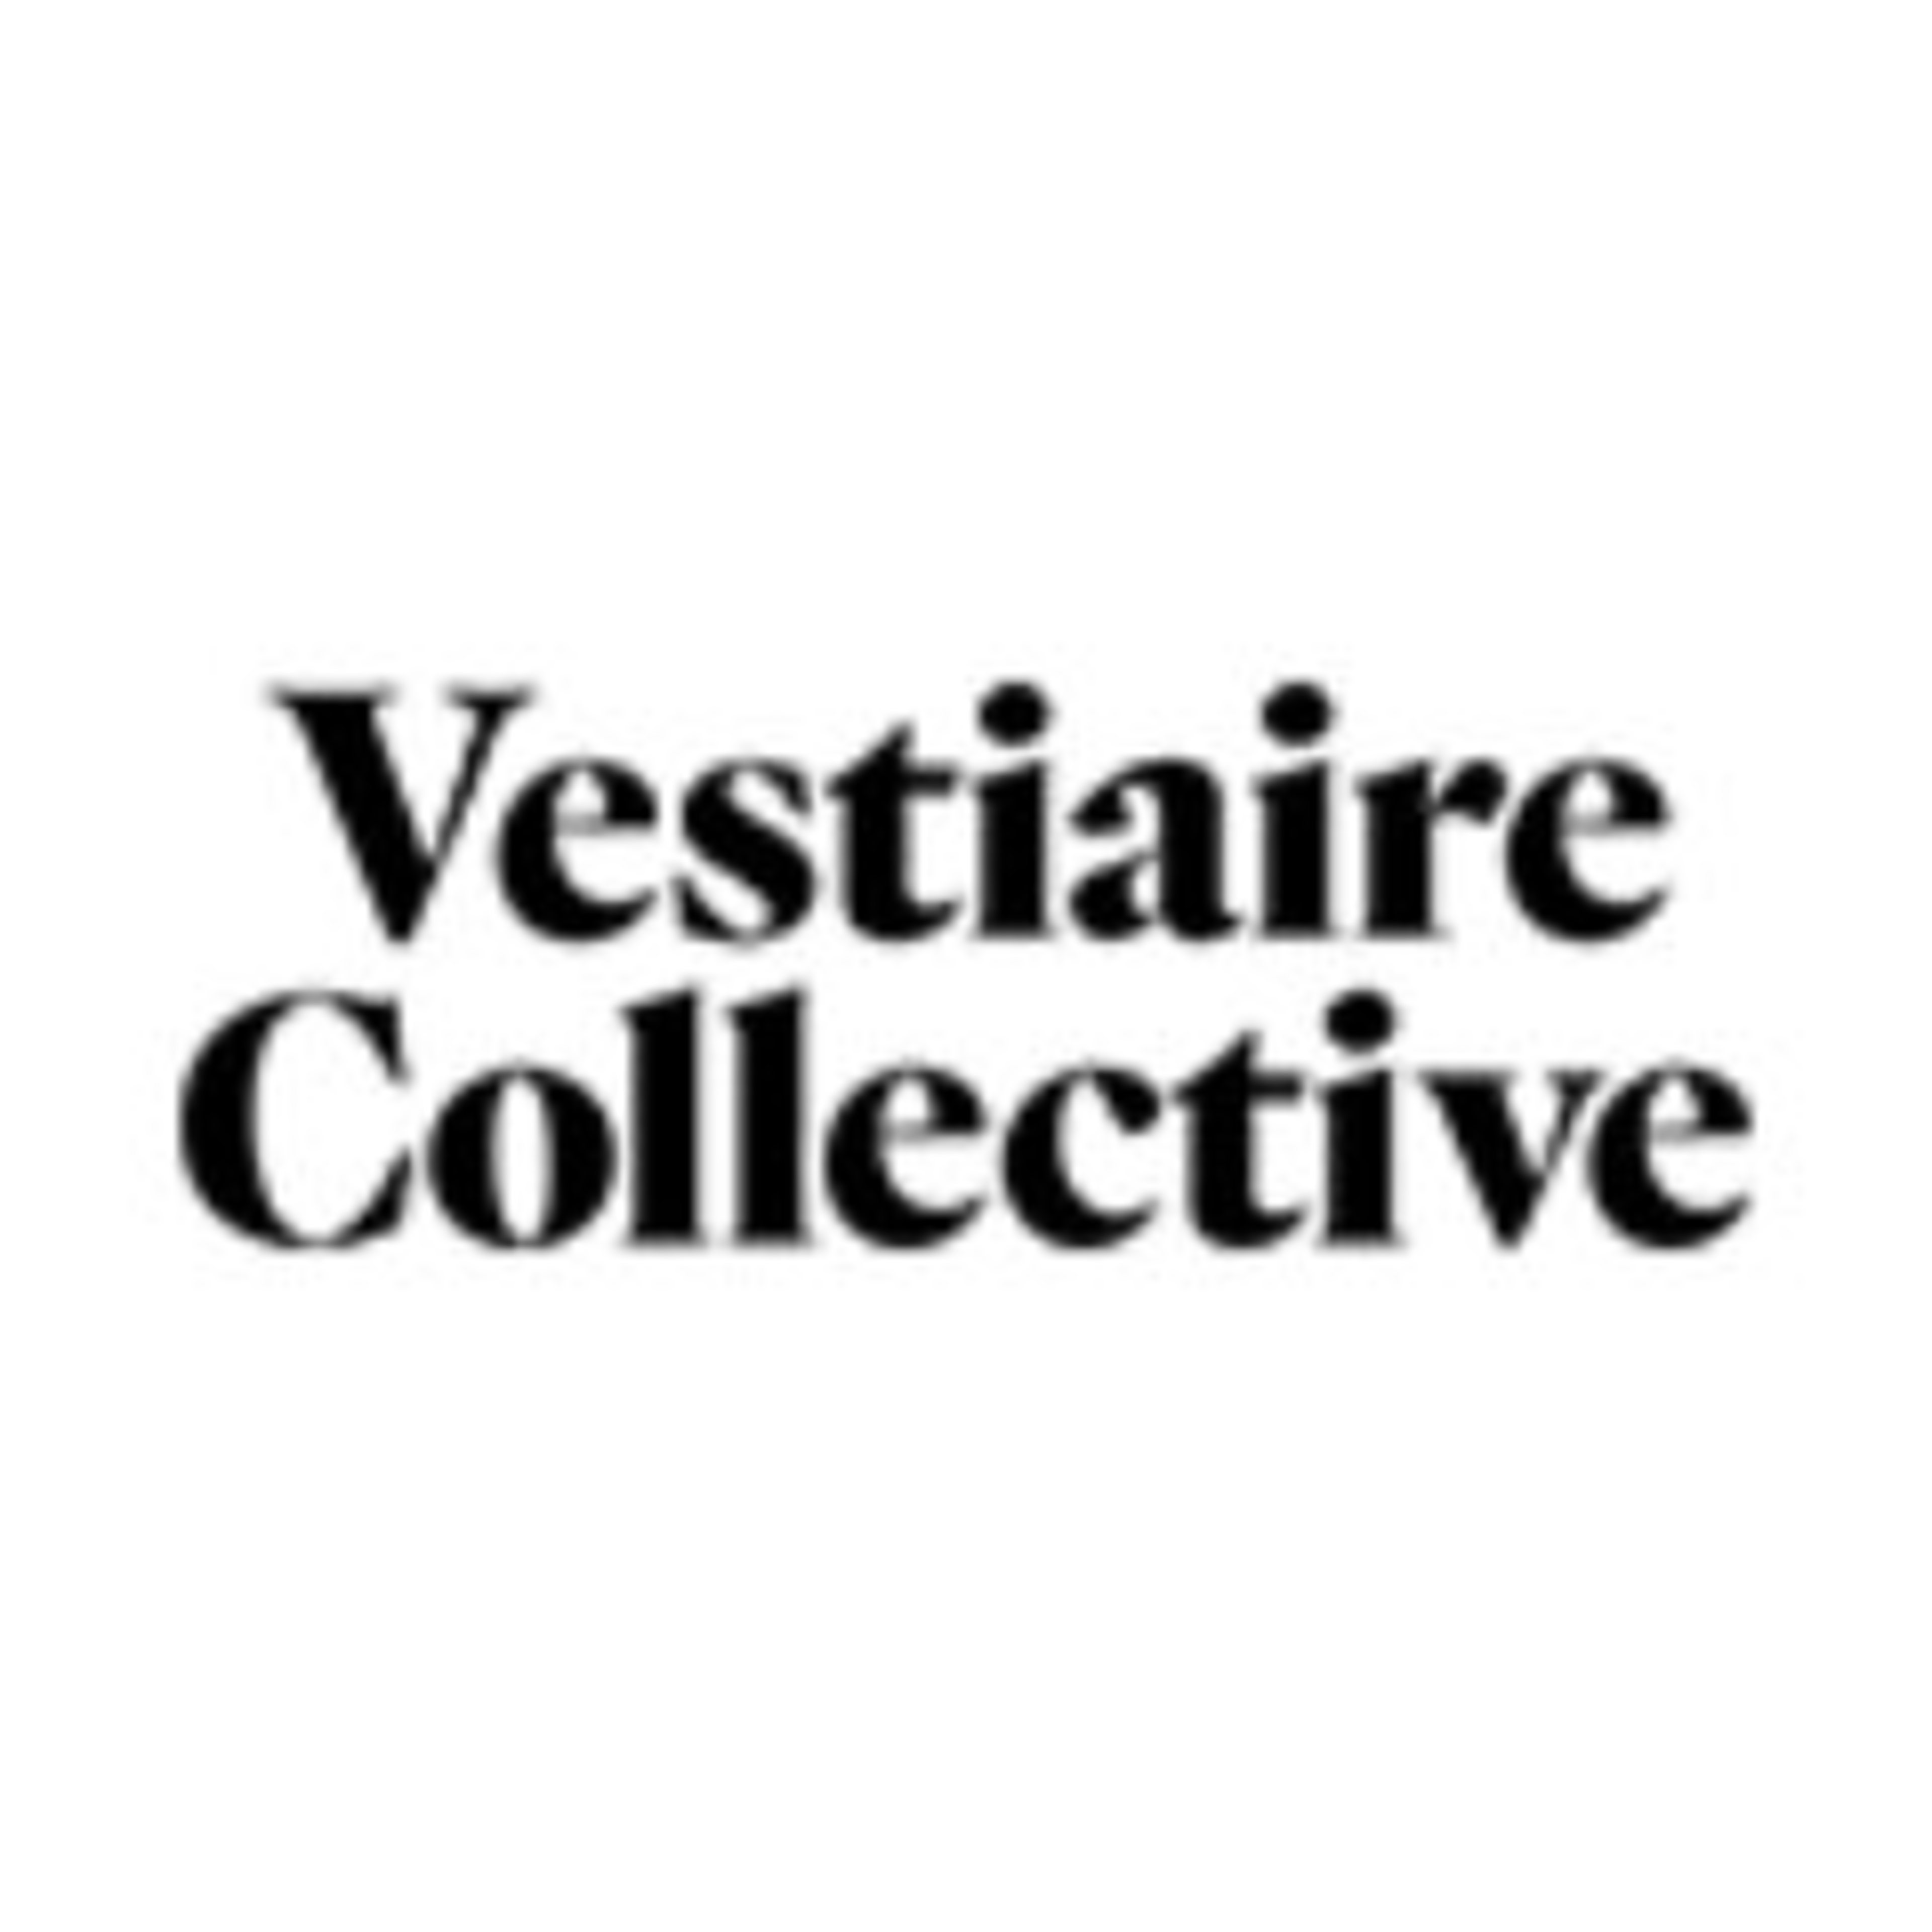 How to Scrape Vestiaire Collective for Fashion Product Data